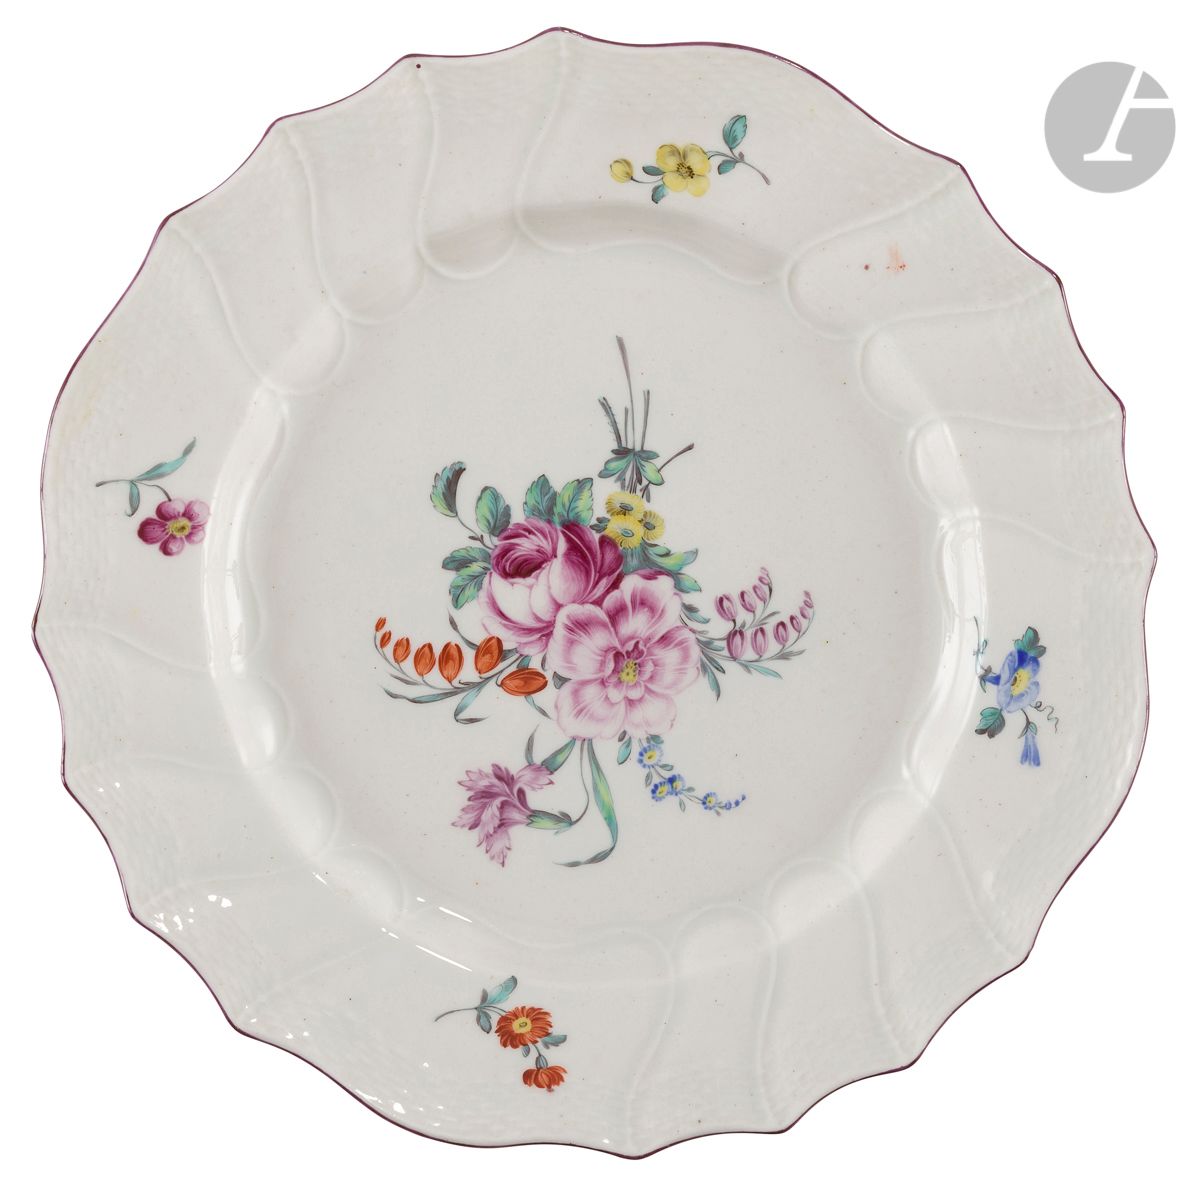 Null Tournai
Plate with contoured edge in soft porcelain with basketry motifs an&hellip;